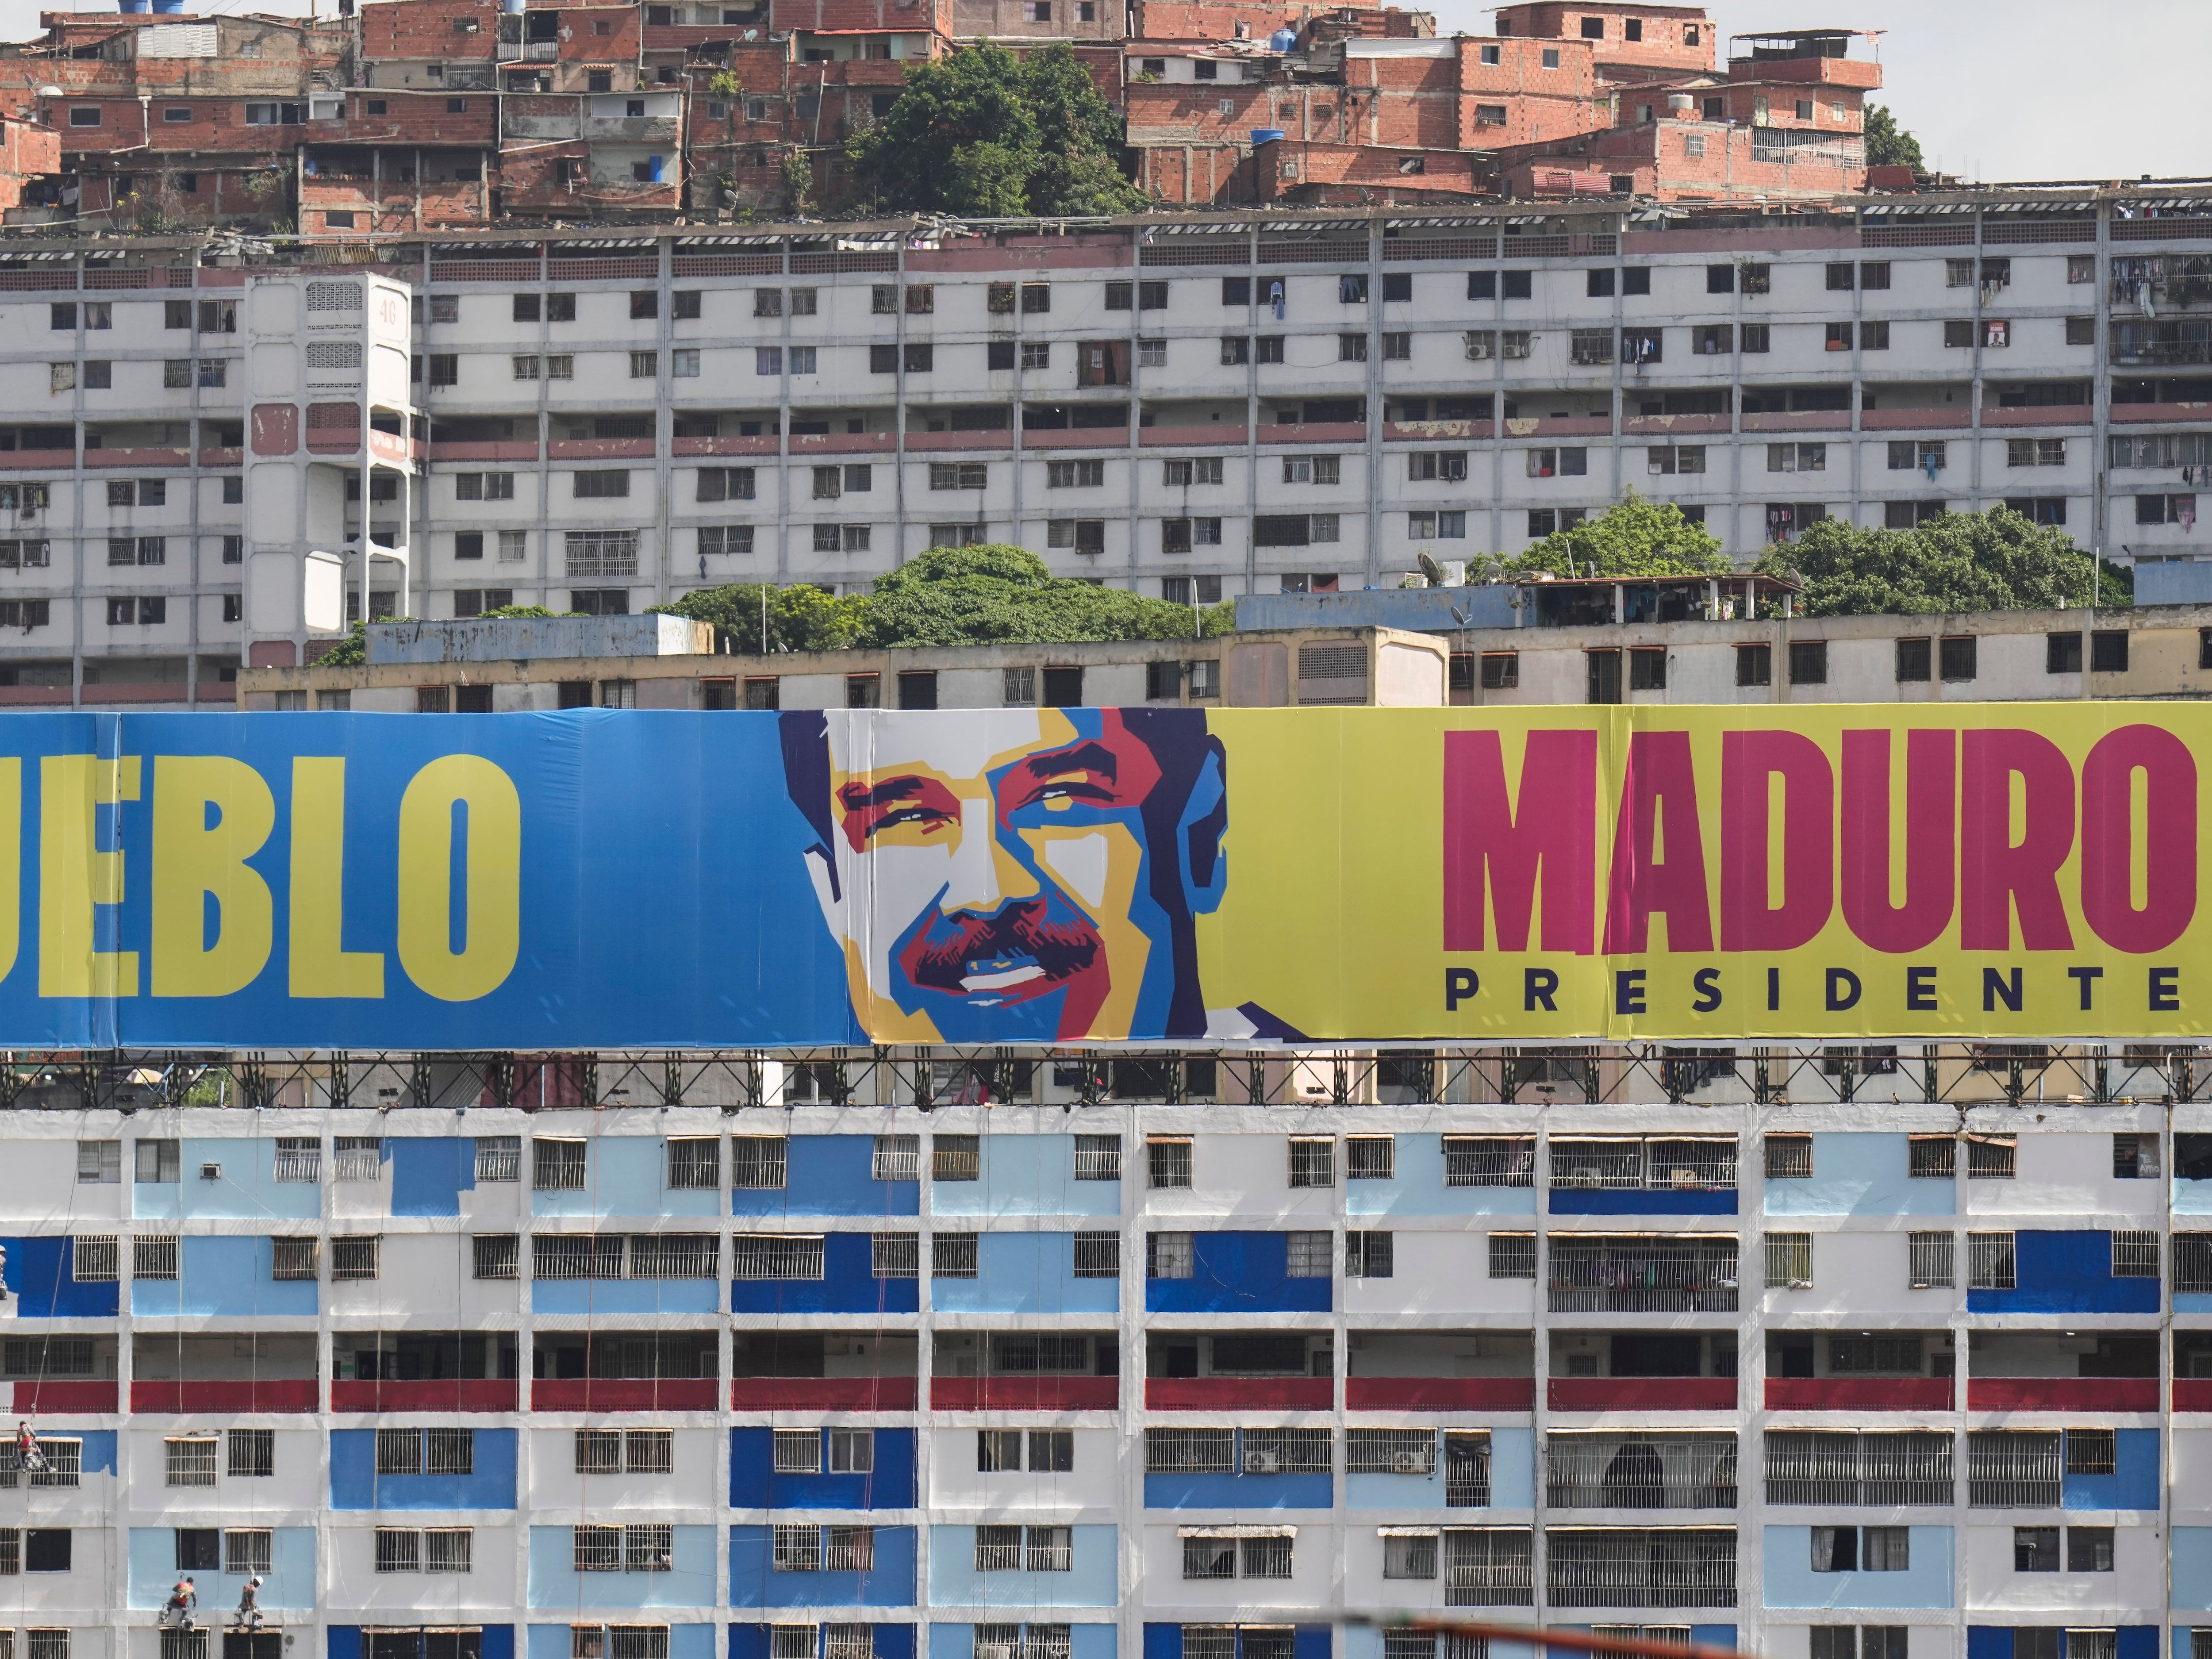 Venezuela election could see seismic shift or give Nicolas Maduro six more years